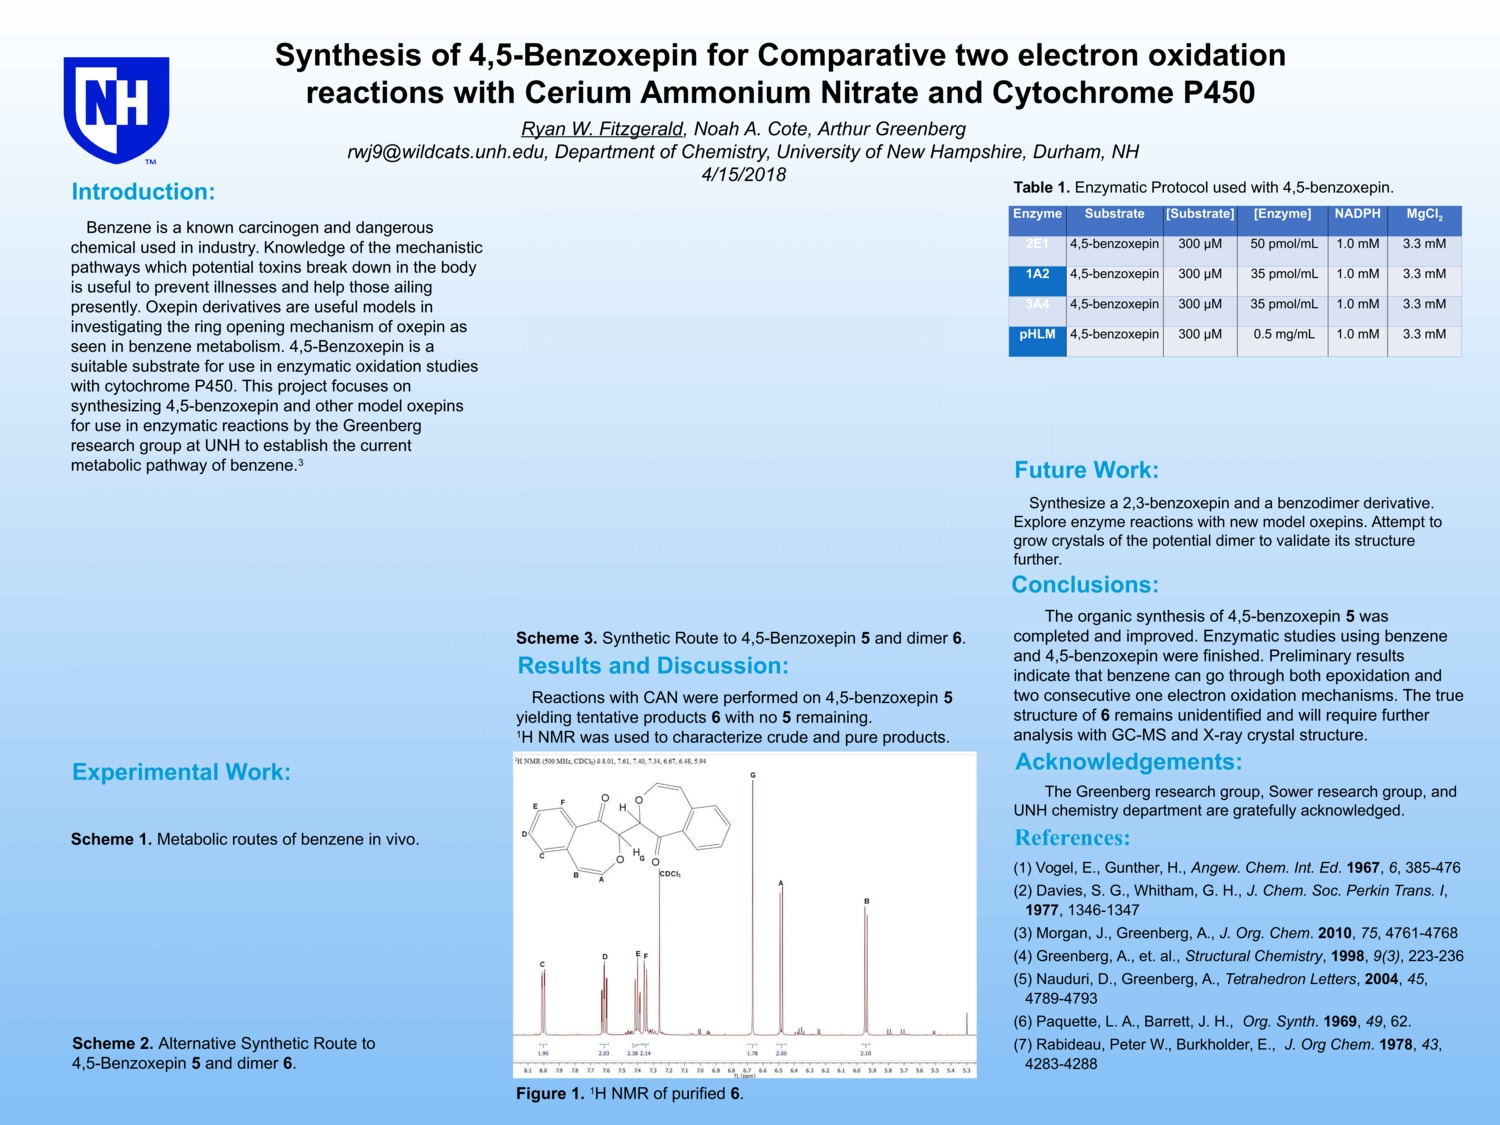 Synthesis Of 4,5-Benzoxepin For Comparative Two Electron Oxidation Reactions With Cerium Ammonium Nitrate And Cytochrome P450 by rwj9